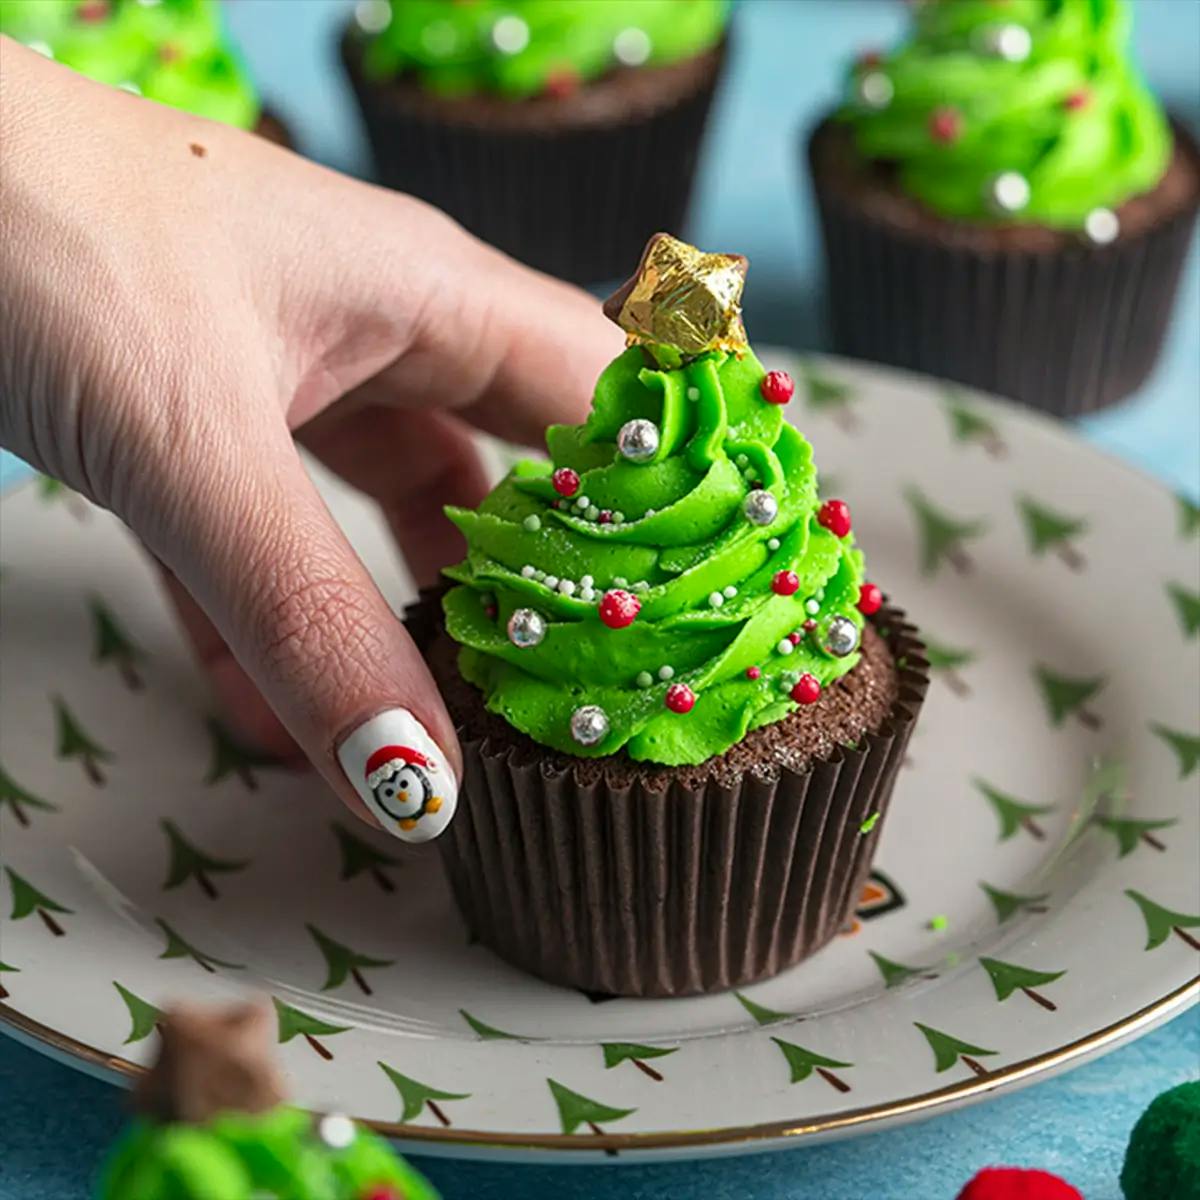 A glute-free chocolate cupcake with green frosting shaped like a Christmas tree.